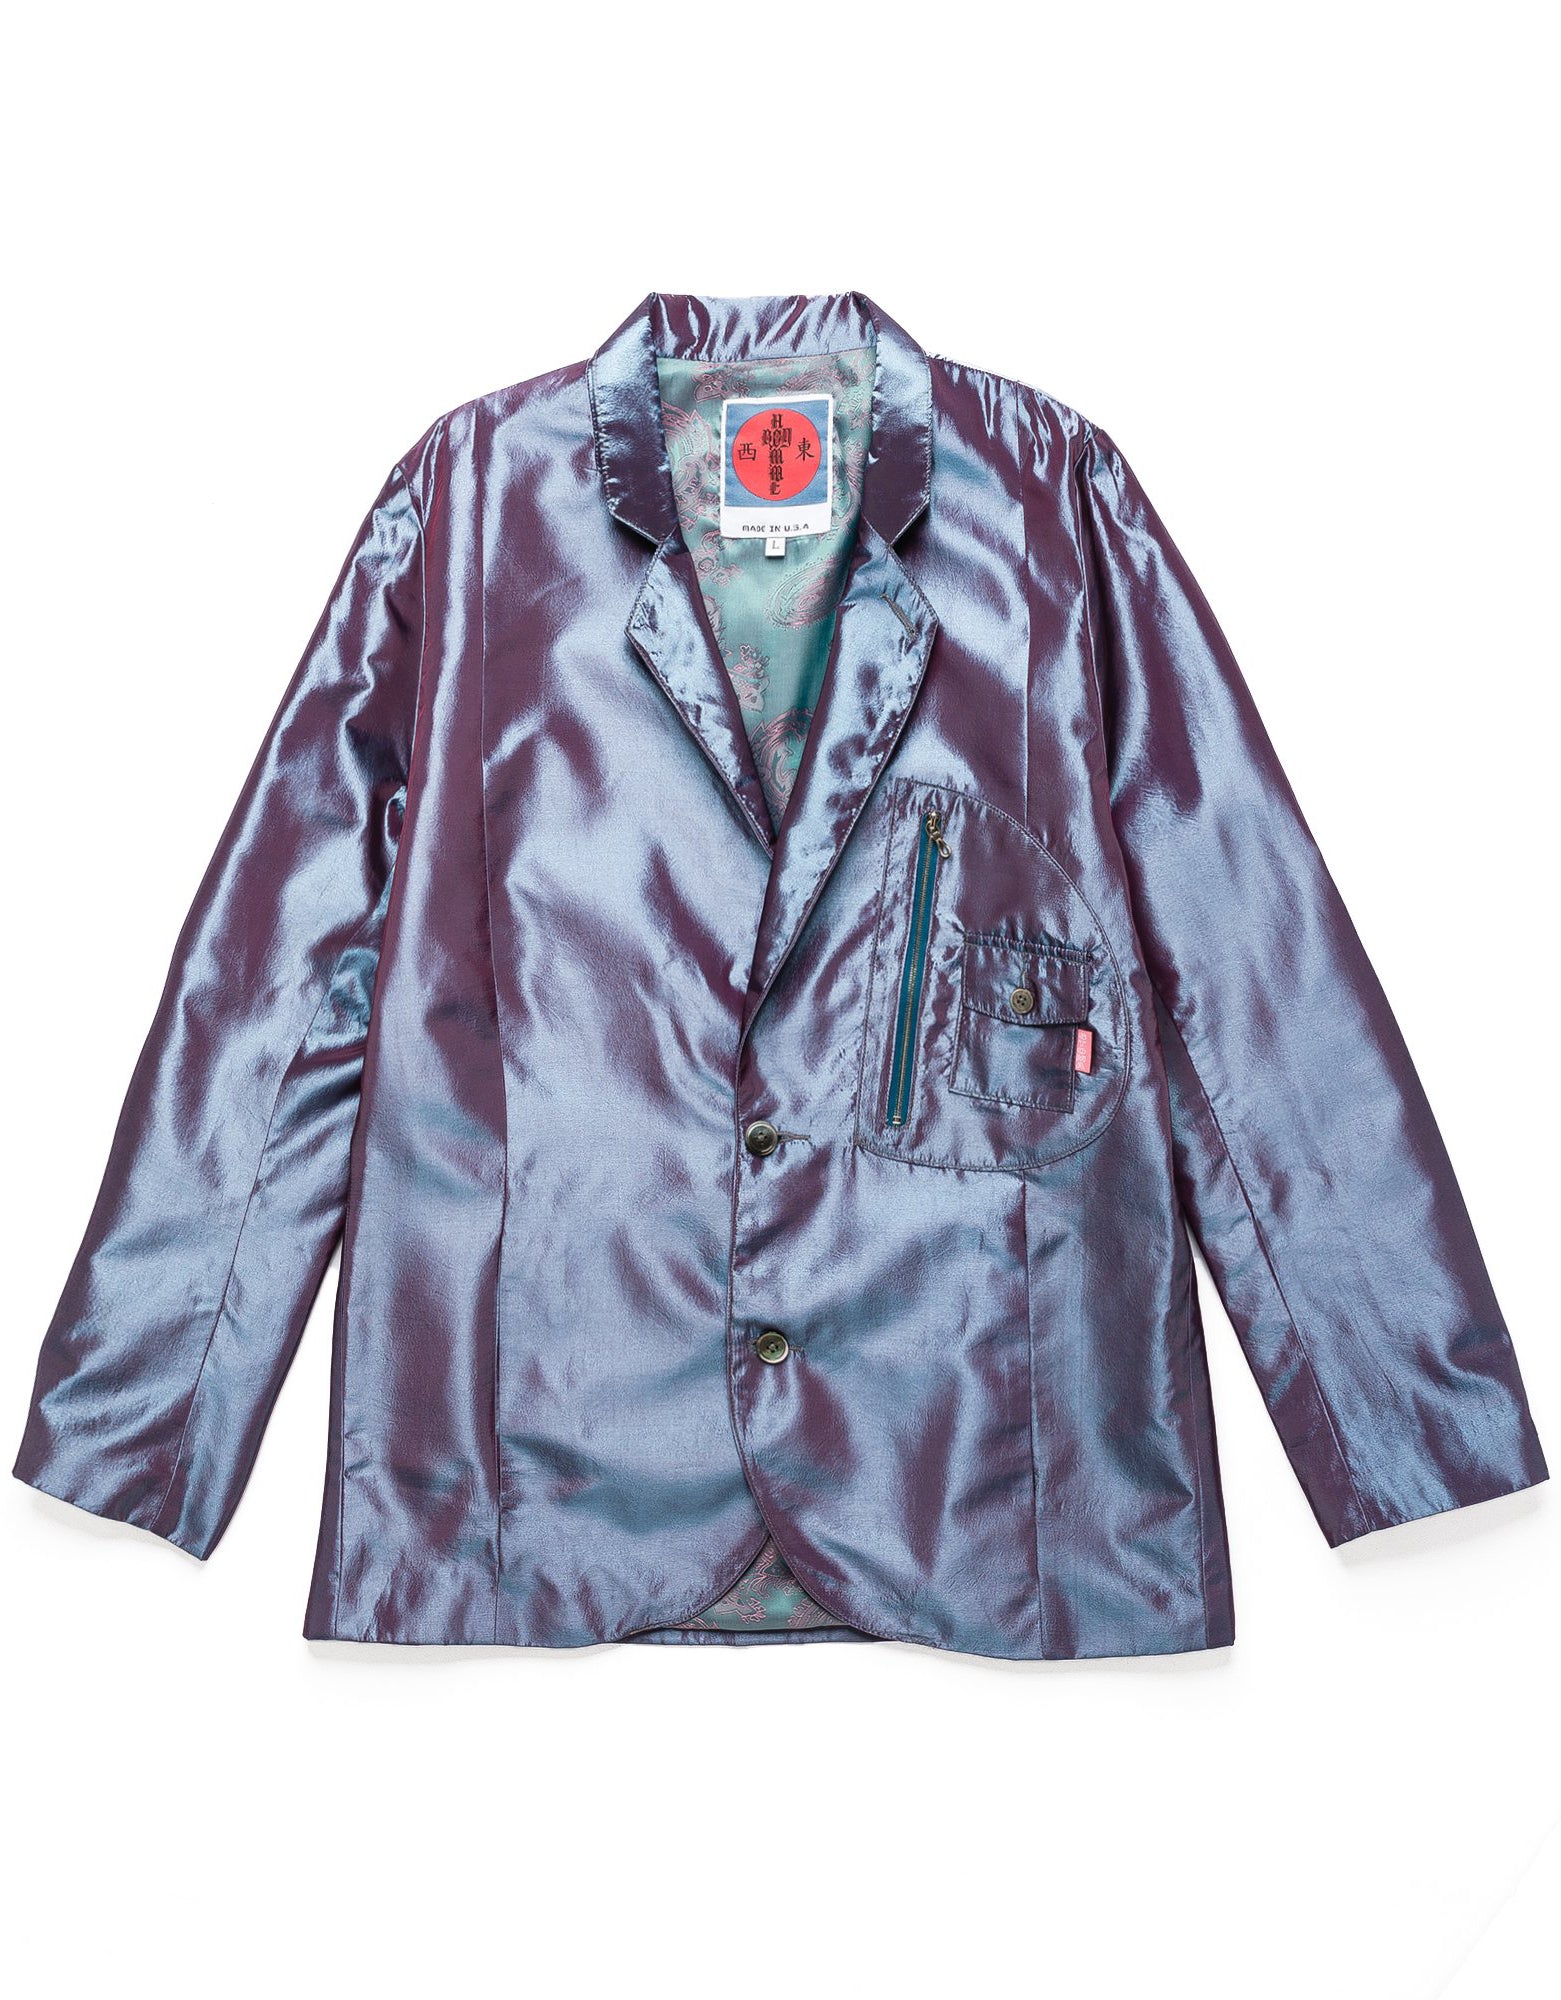 Incredible hand beaded @louisvuitton iridescent jacket from